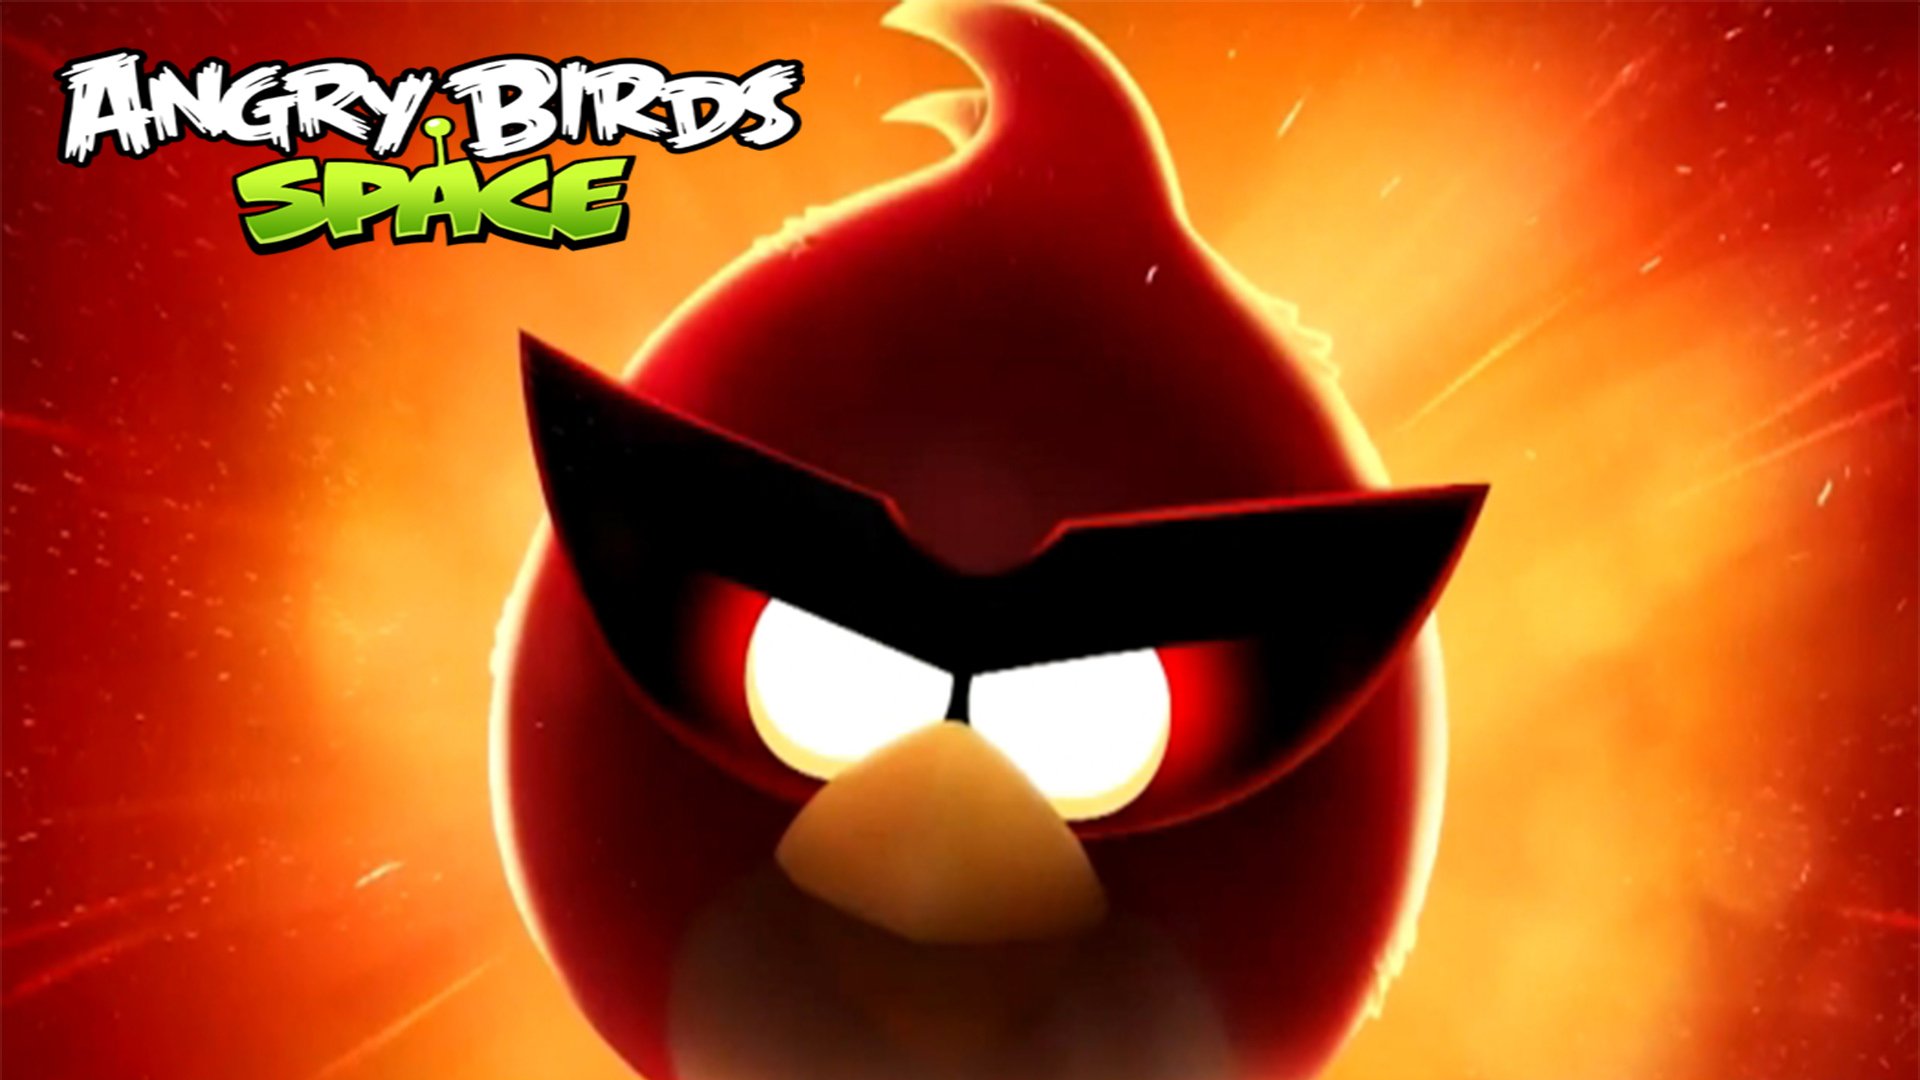 angry birds space hd mirror world